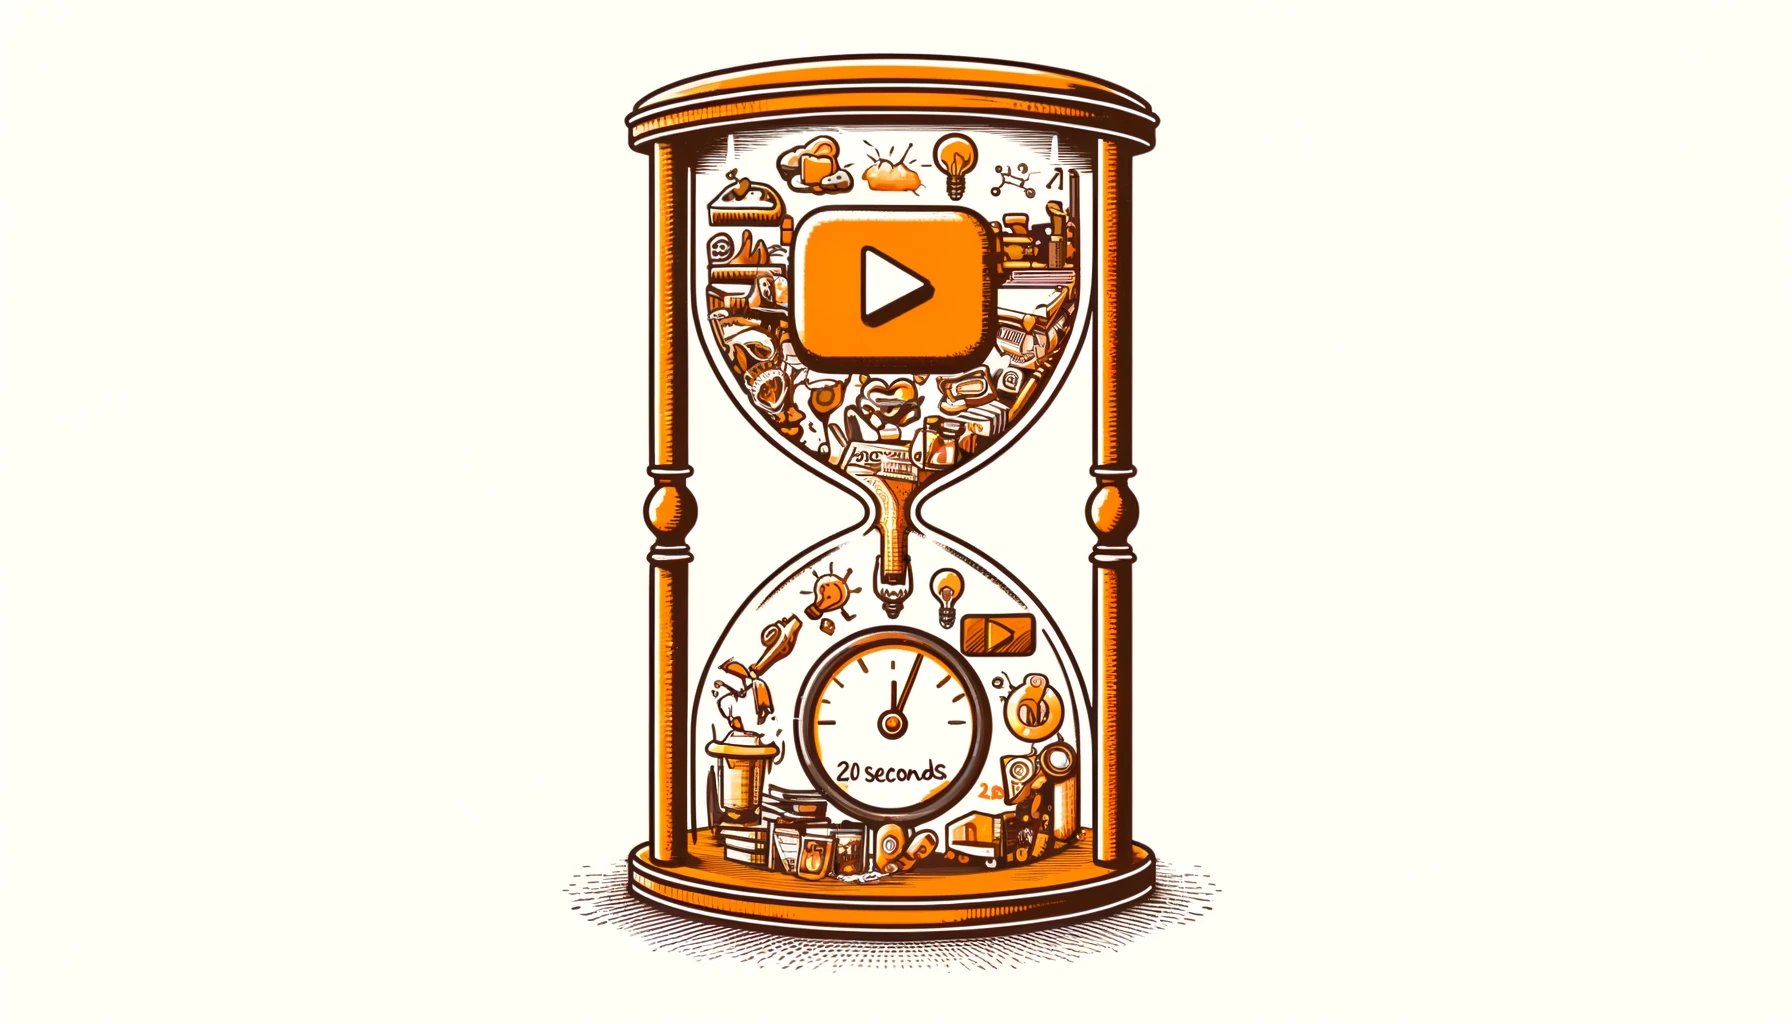 How Long Does It Take to Extract Insights from an Hour Video? 20 seconds.